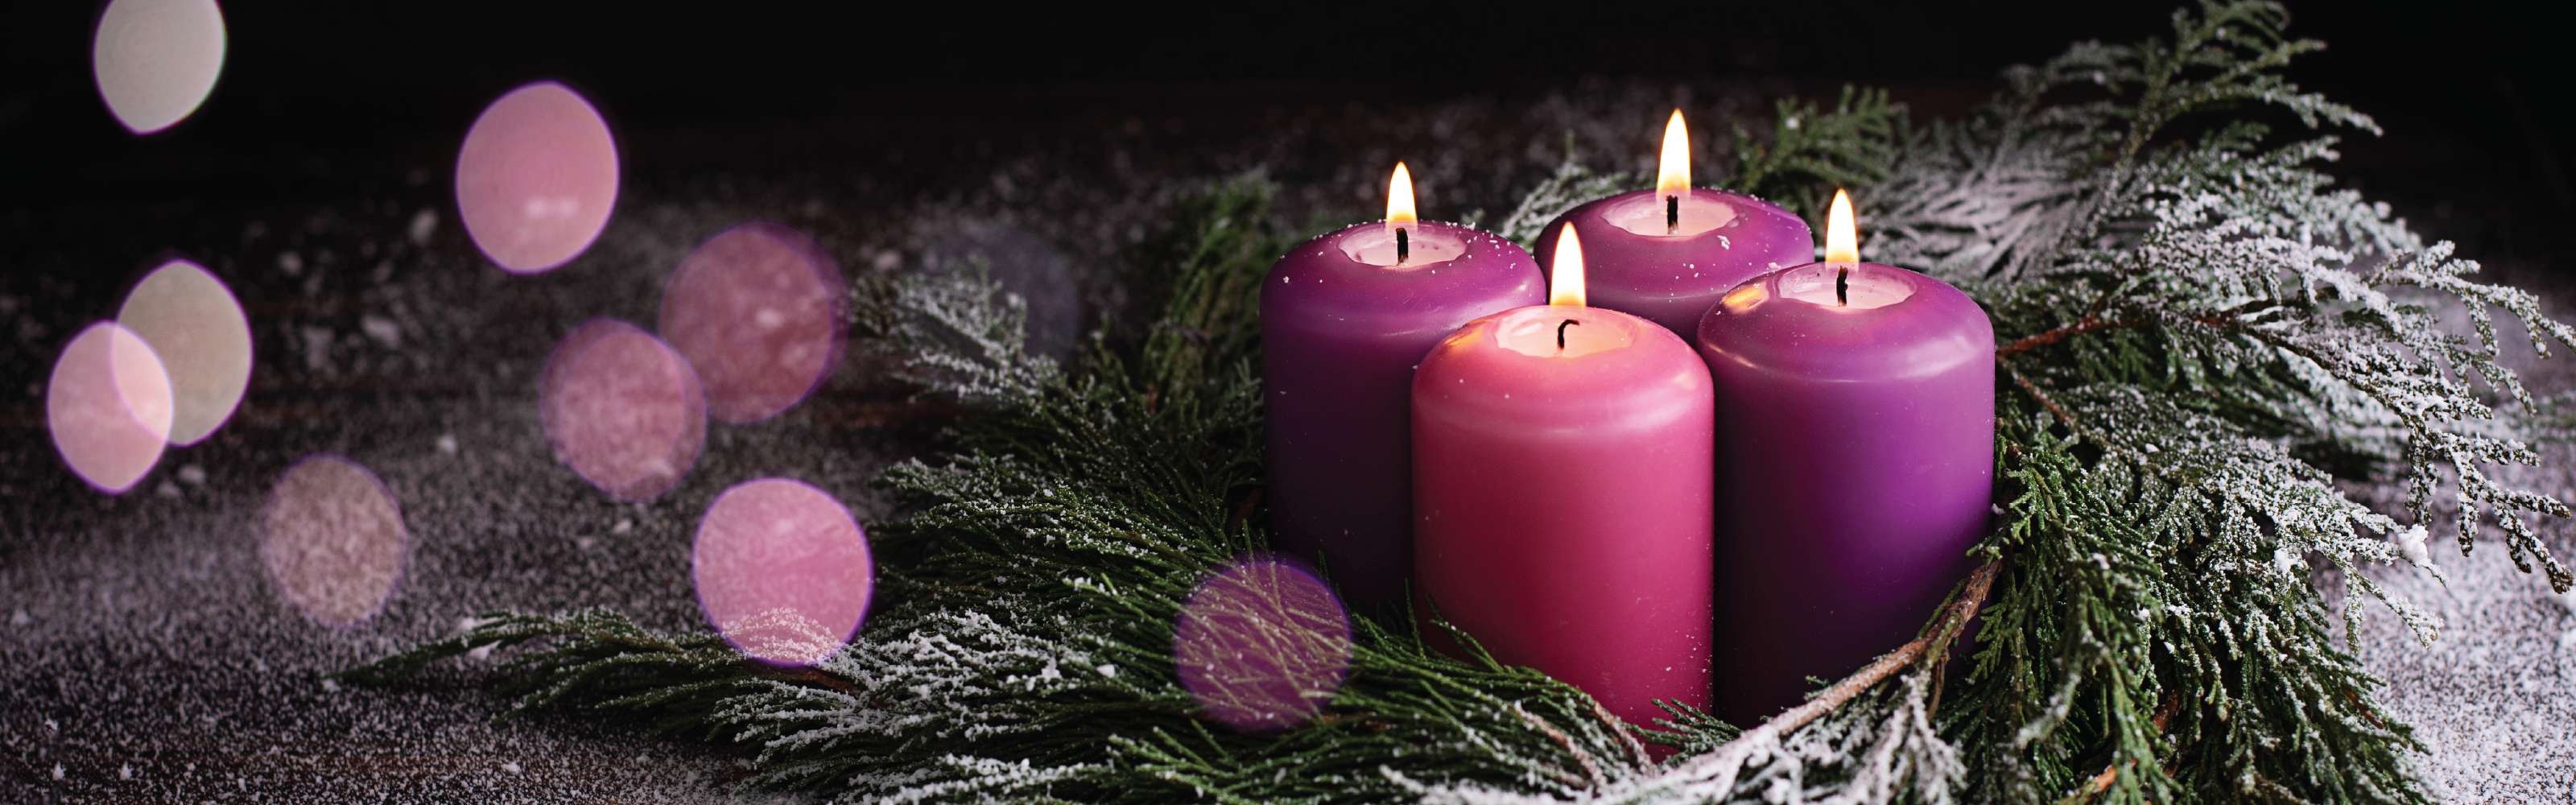 An image consists of 3 purple candles and 1 pink candle inside a wreath. 